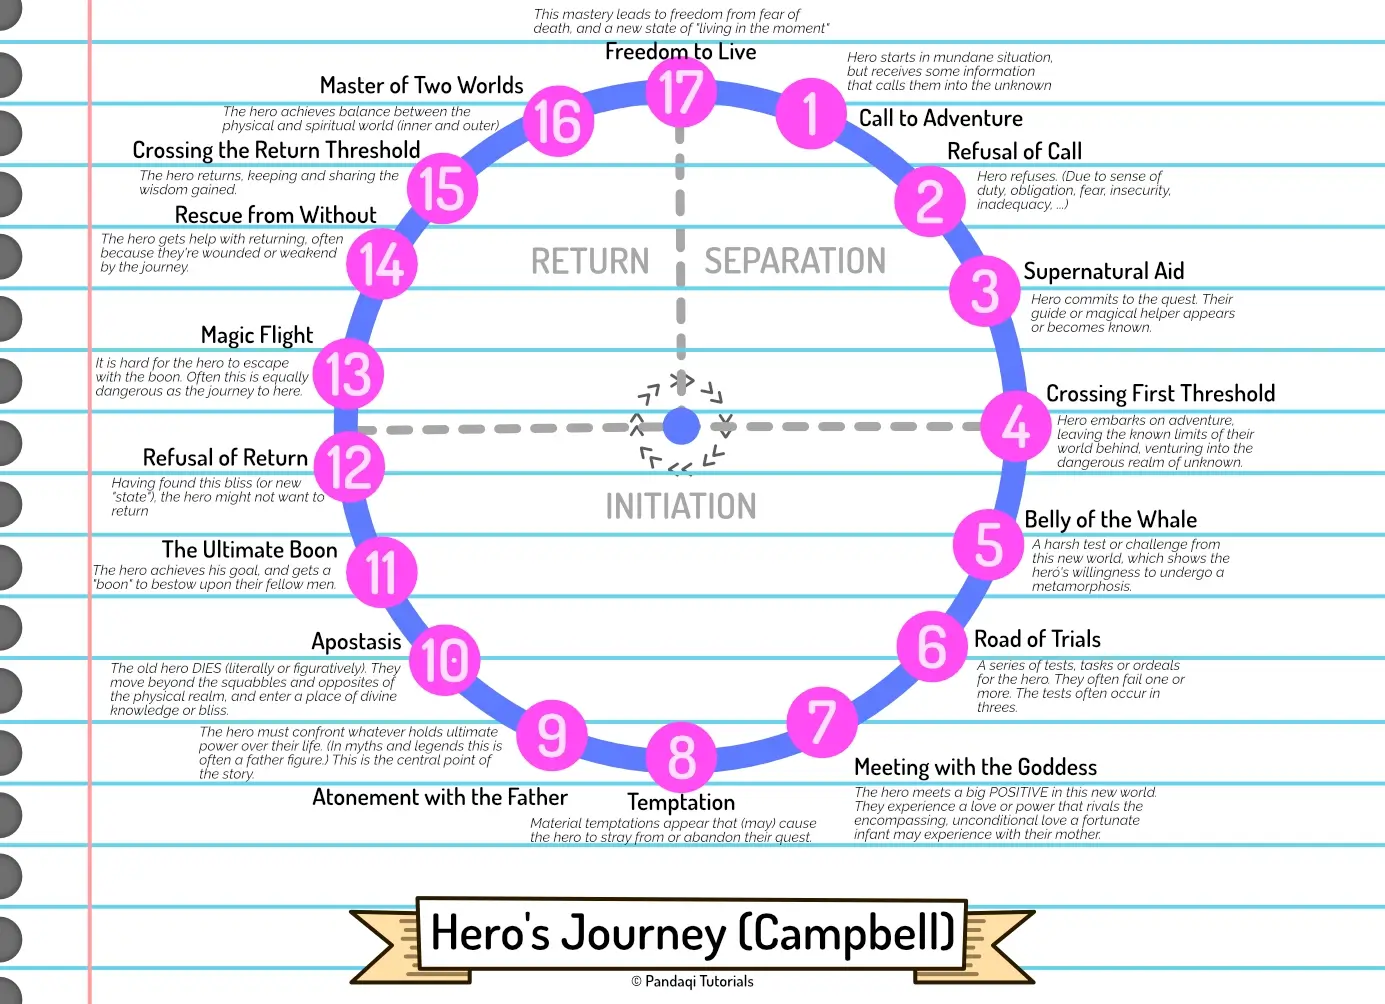 Visualization of the original (heavily myth-inspired) Hero’s Journey, with 17 steps.